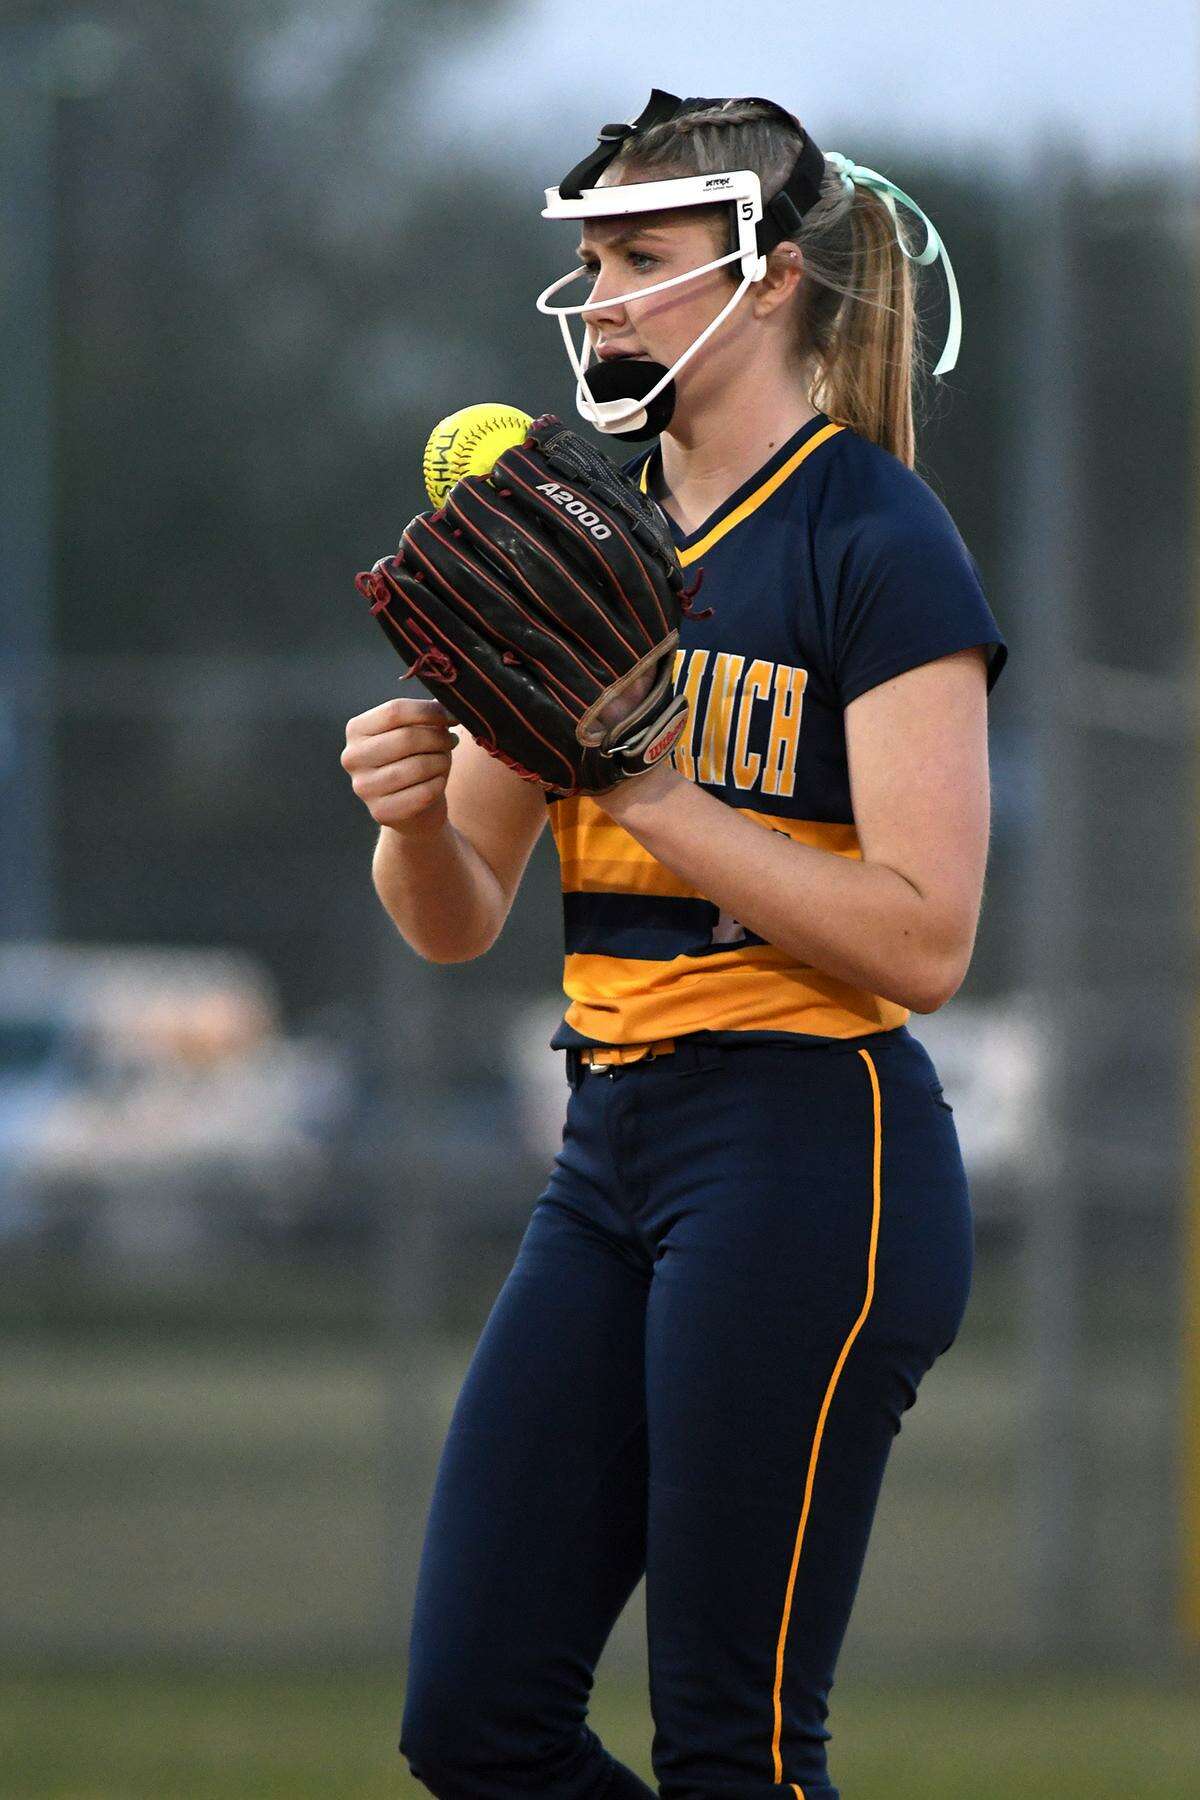 Cy Ranch junior pitcher Britton Rogers was named the 2018-19 District 14-6A Most Valuable Player.